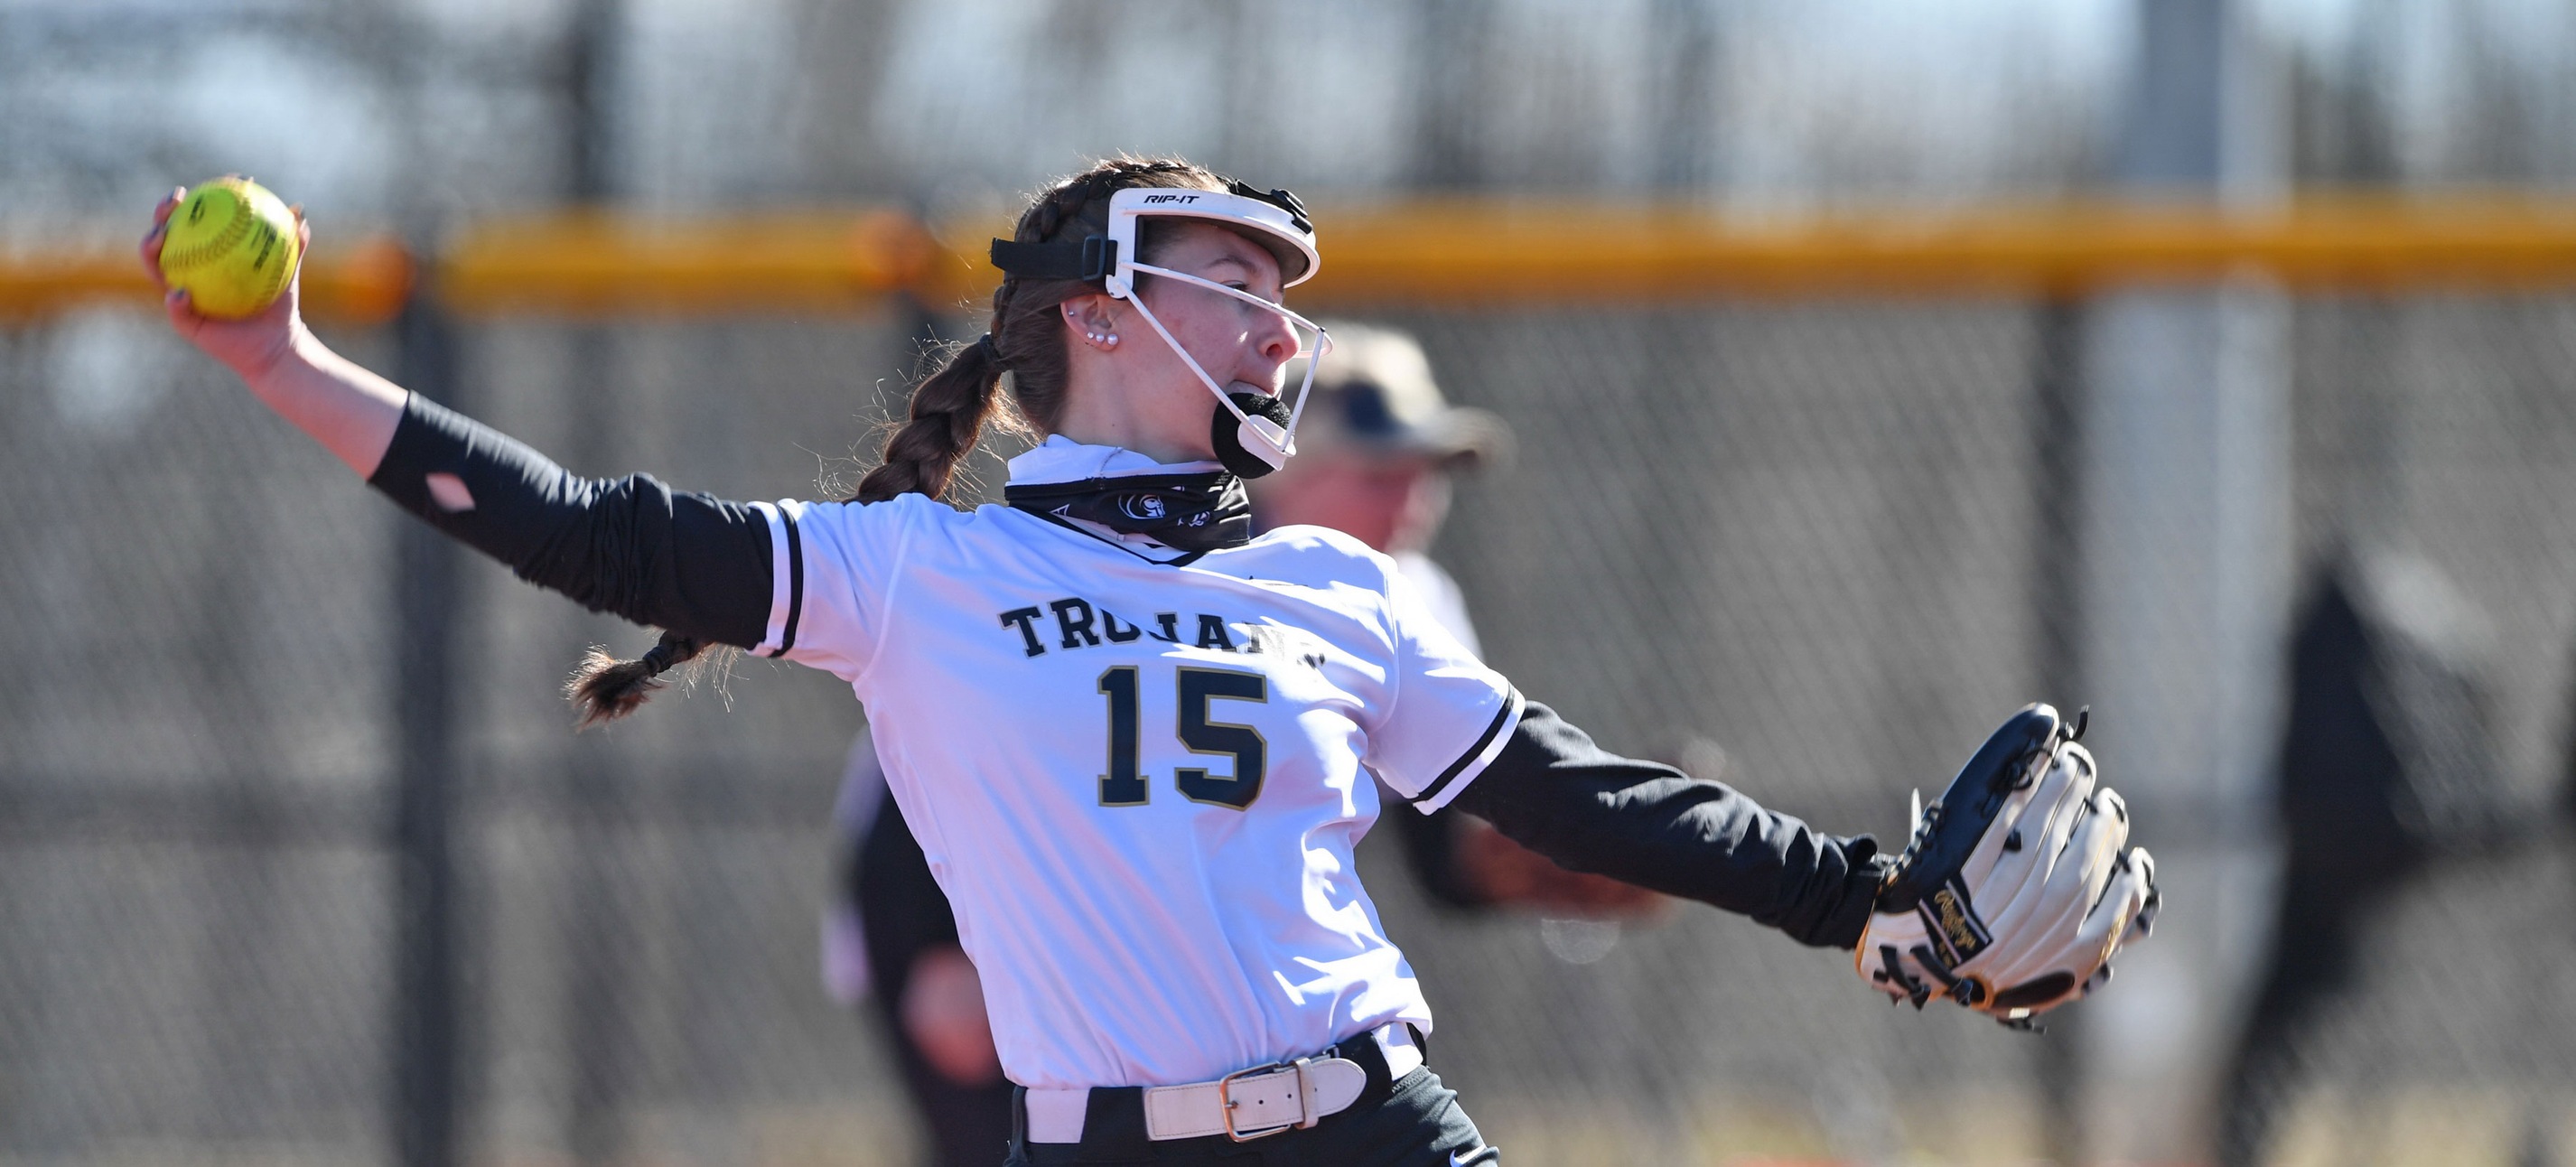 Trojans Open 2021 Season With Doubleheader Sweep Over North Greenville